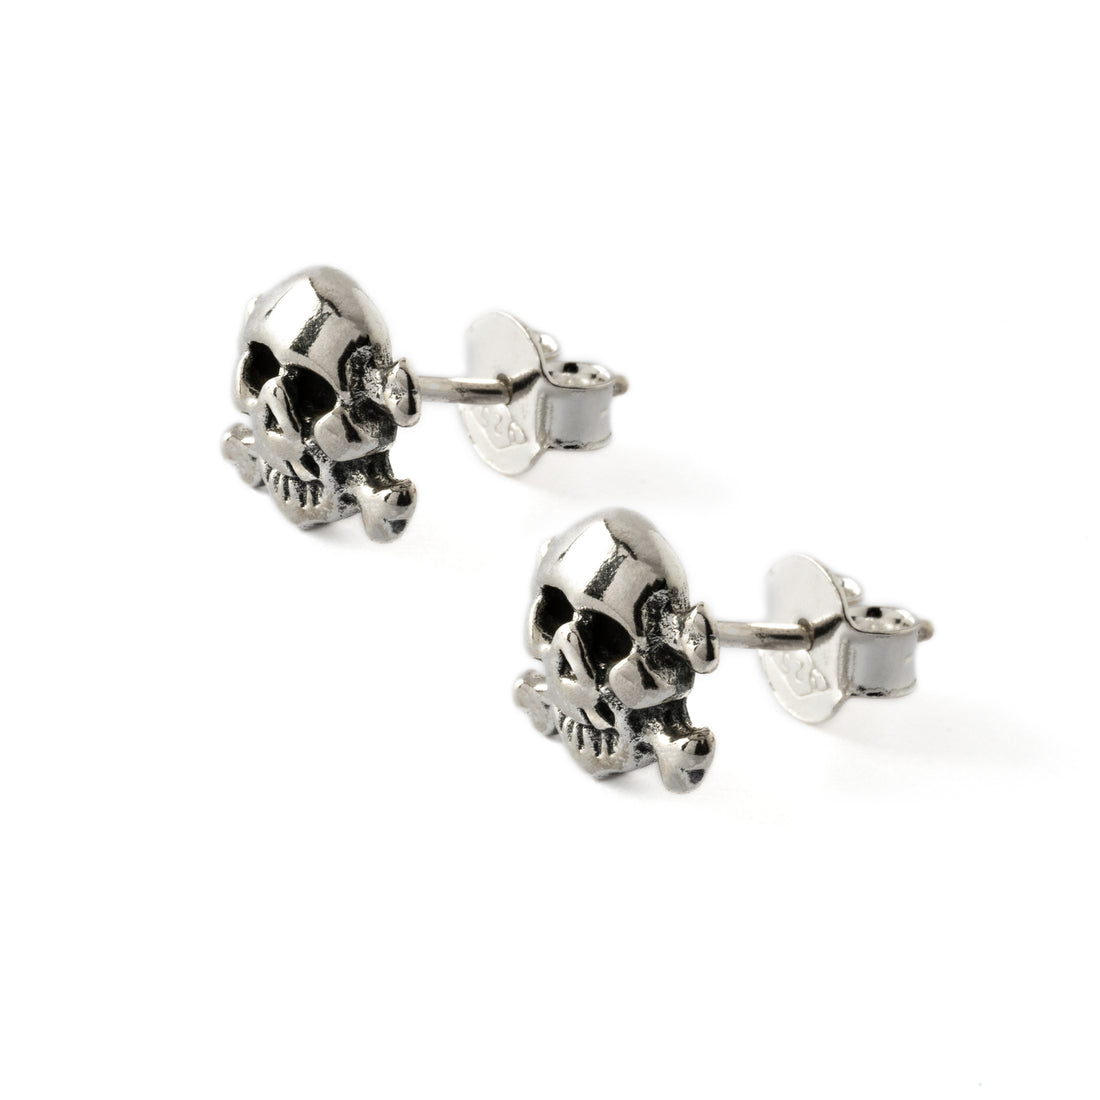 pair of silver pirate stud earrings left side view